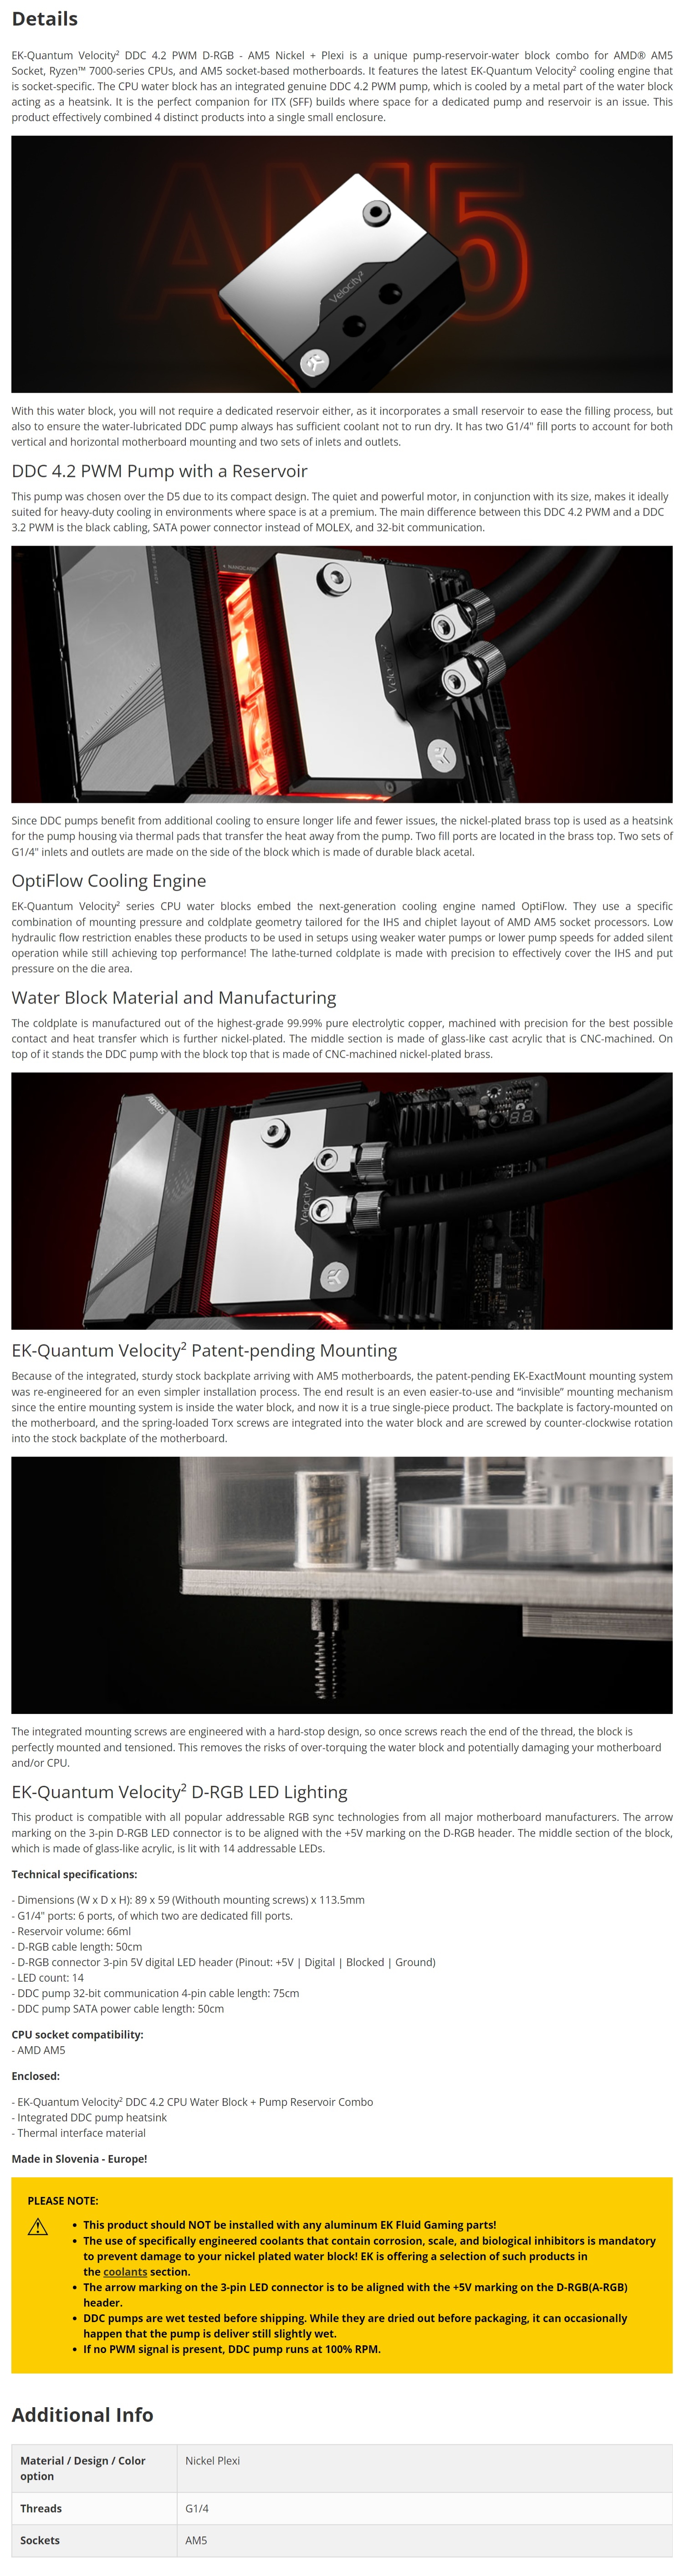 A large marketing image providing additional information about the product EK Quantum Velocity2 DDC 4.2 PWM D-RGB AM5 CPU Waterblock - Nickel + Plexi - Additional alt info not provided